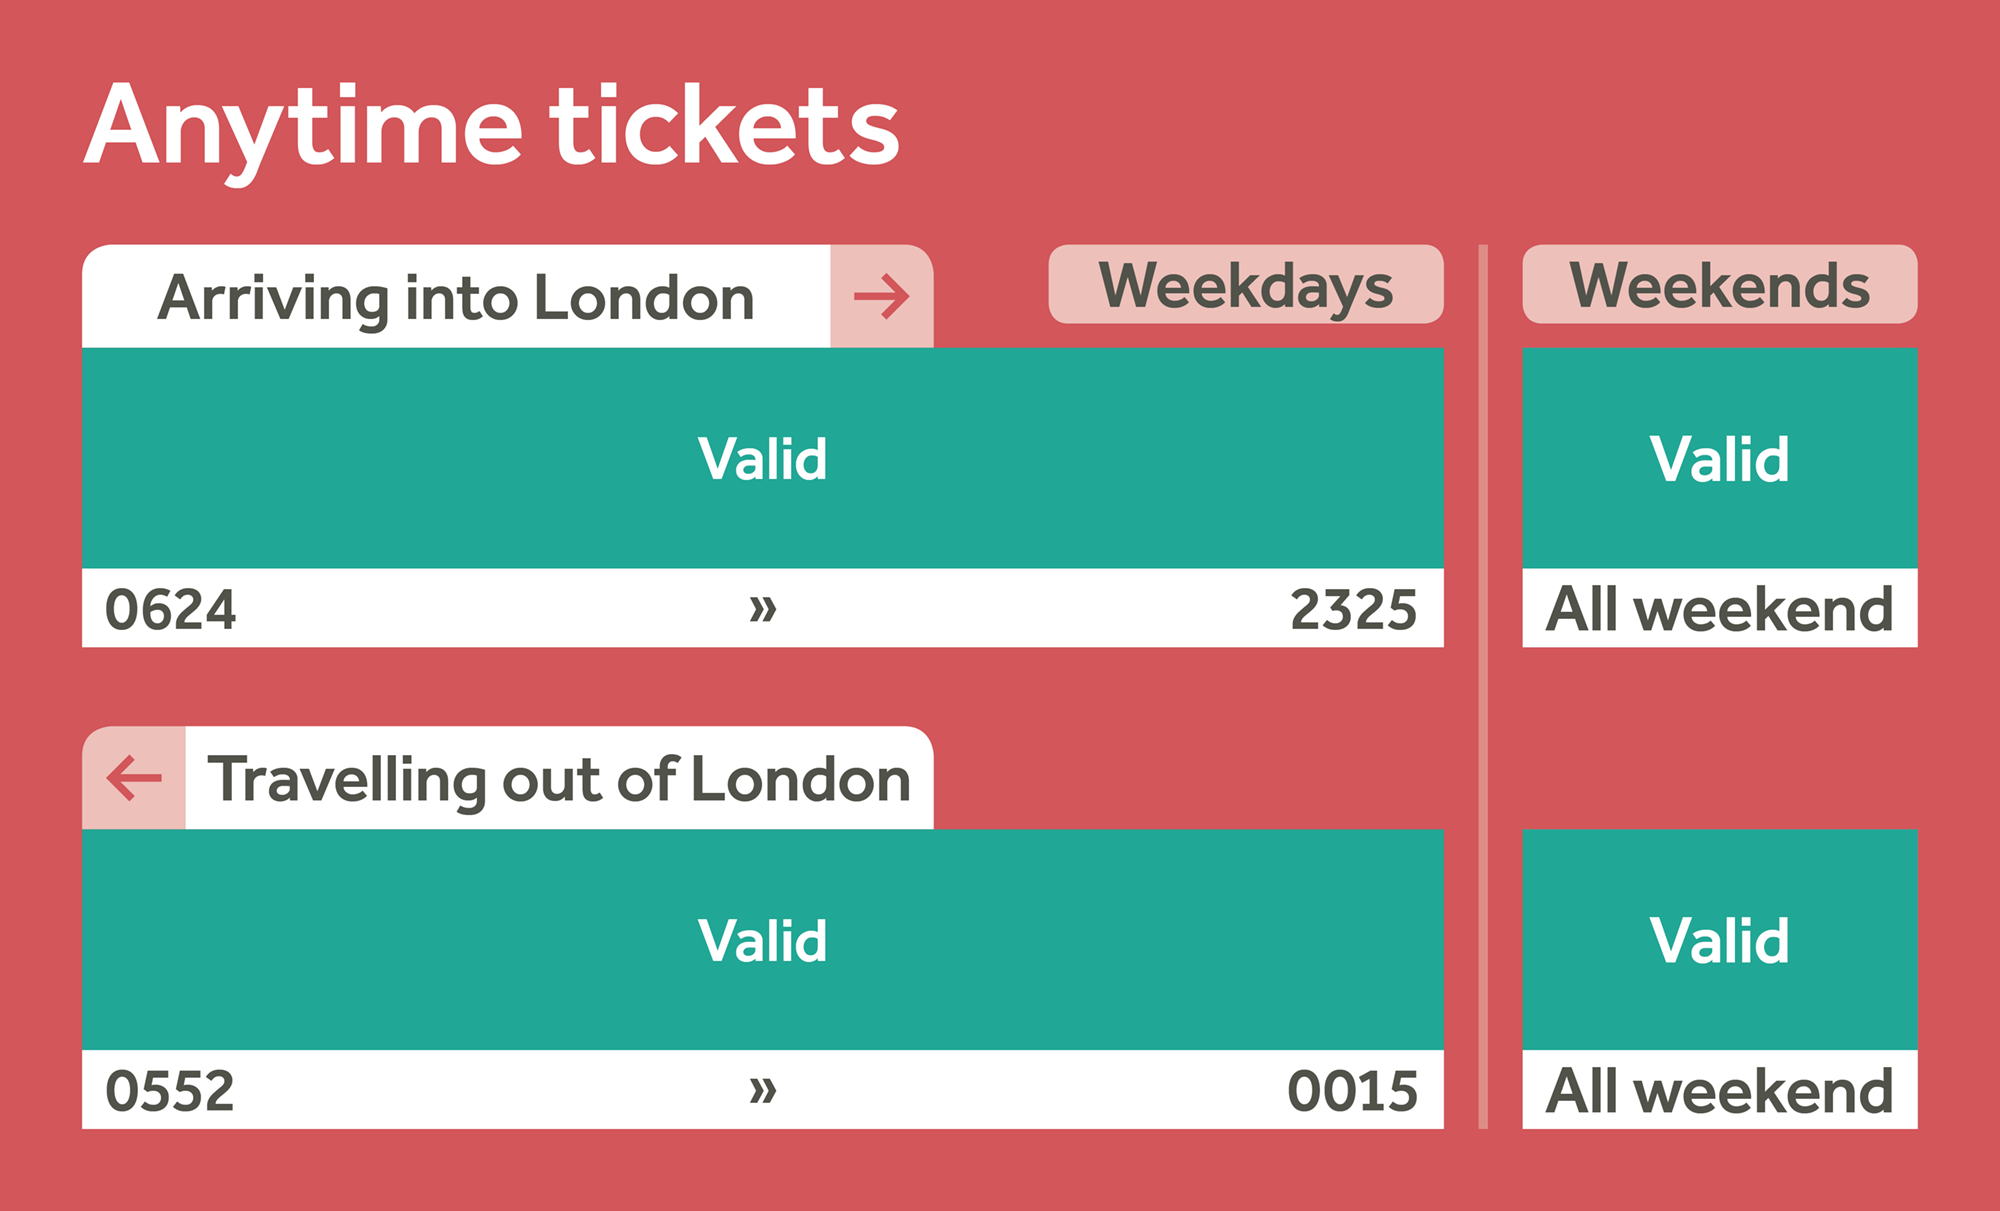 Anytime tickets arriving into London are valid between 06:24 and 23:25 on weekdays and are valid all weekend. Anytime tickets travelling out of London are valid between 05:52 and 00:15 on weekdays and are valid all weekend. 